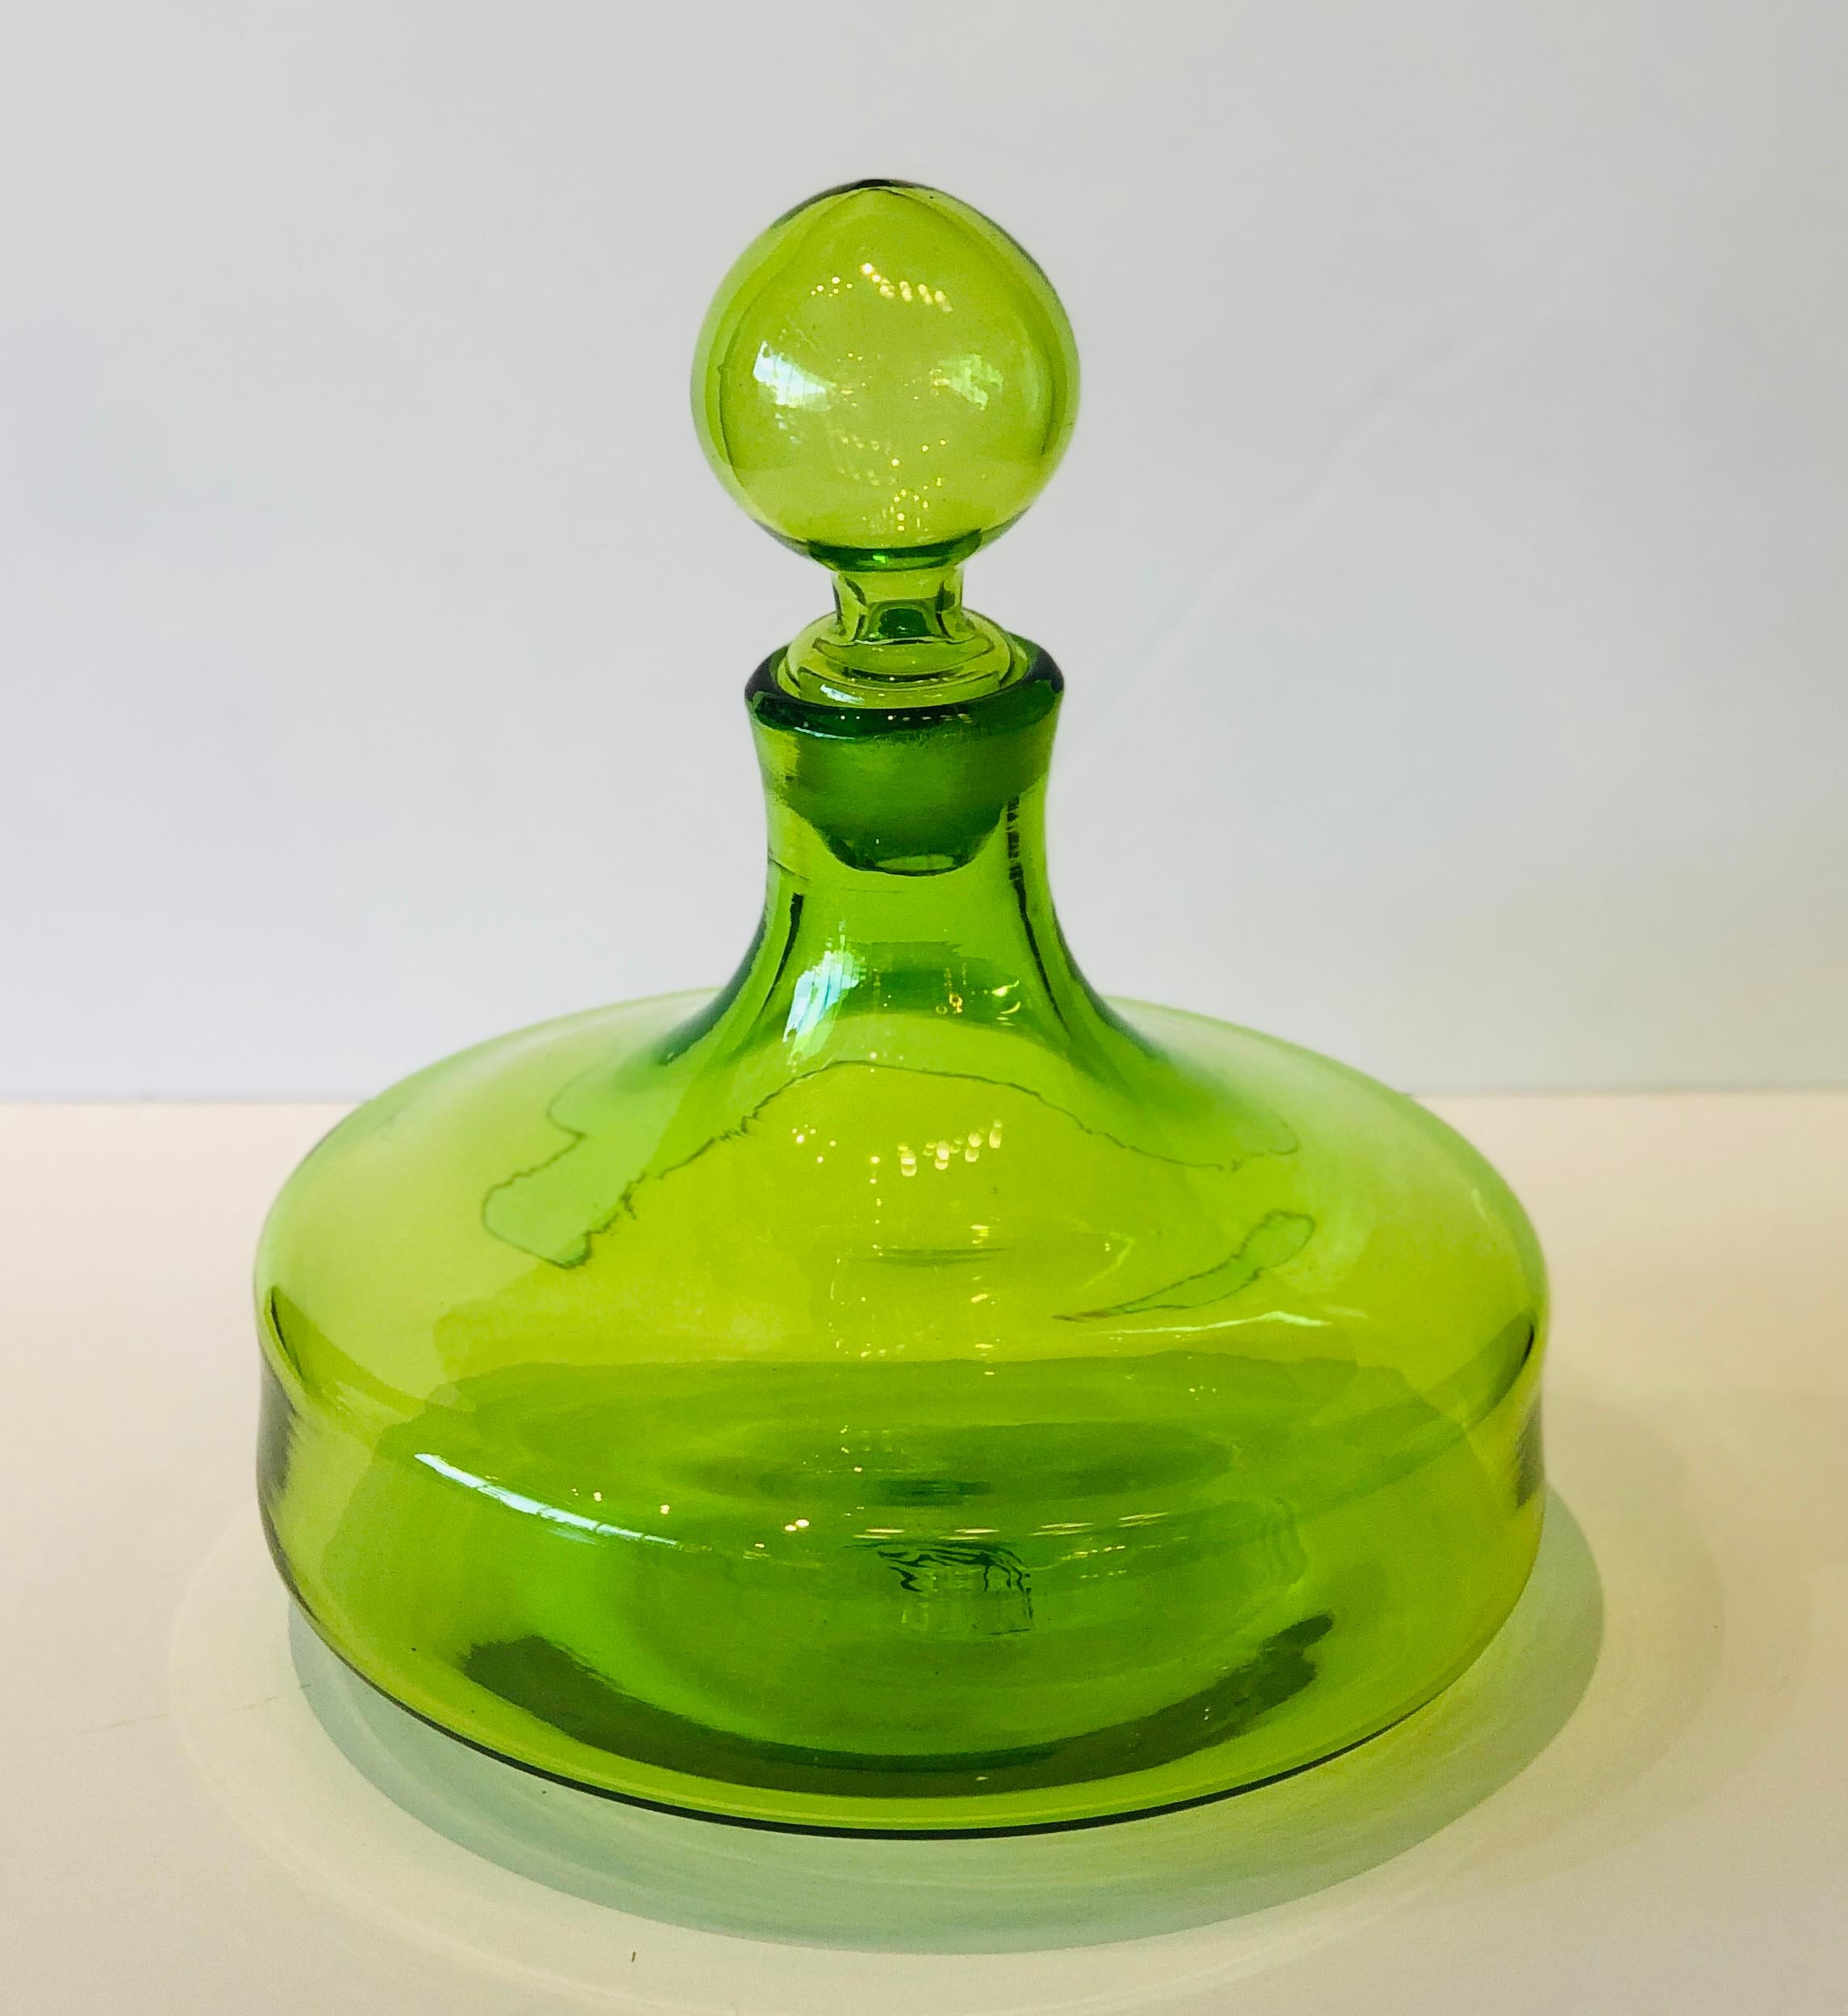 Offered is a Mid-Century Modern large chartreuse / apple green Blenko style blown glass decanter with large ball stopper. This special piece with its wonderful curves would look fabulous on a bar, bar cart, as a table centerpiece or as gorgeous